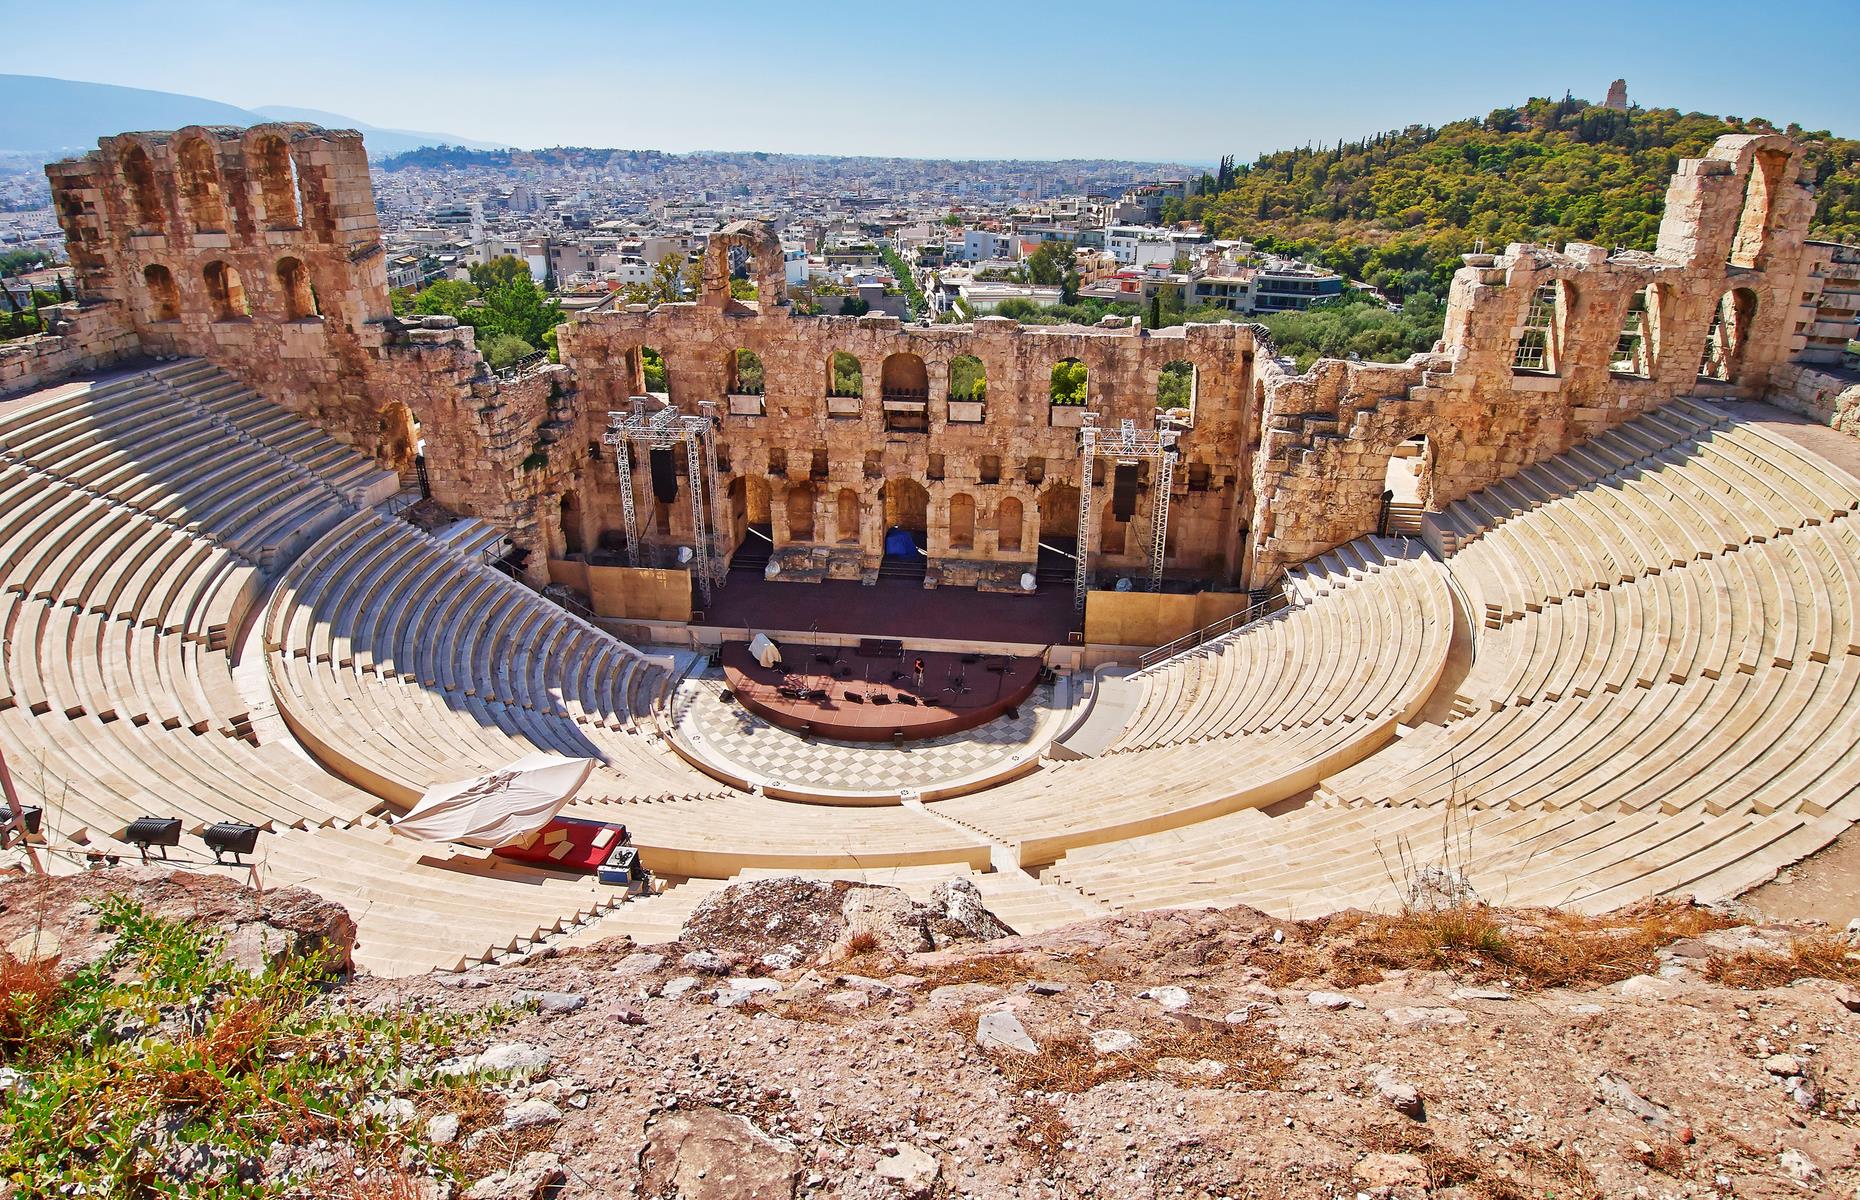 <p>The Greek capital was also the birthplace of theater and is home to the remains of some of the earliest theaters in existence. The Herodion theater (pictured) was constructed by Greek nobleman Tiberius Claudius Herod Atticus on the western slopes of the Acropolis in around 161 AD. But the Theater of Dionysus is even older – in fact, it’s the world's first theater. Built into the southern cliff in the 6th century BC, the most famous playwrights of the classical era – Aeschylus, Sophocles, Euripides among them – had their works performed here. </p>